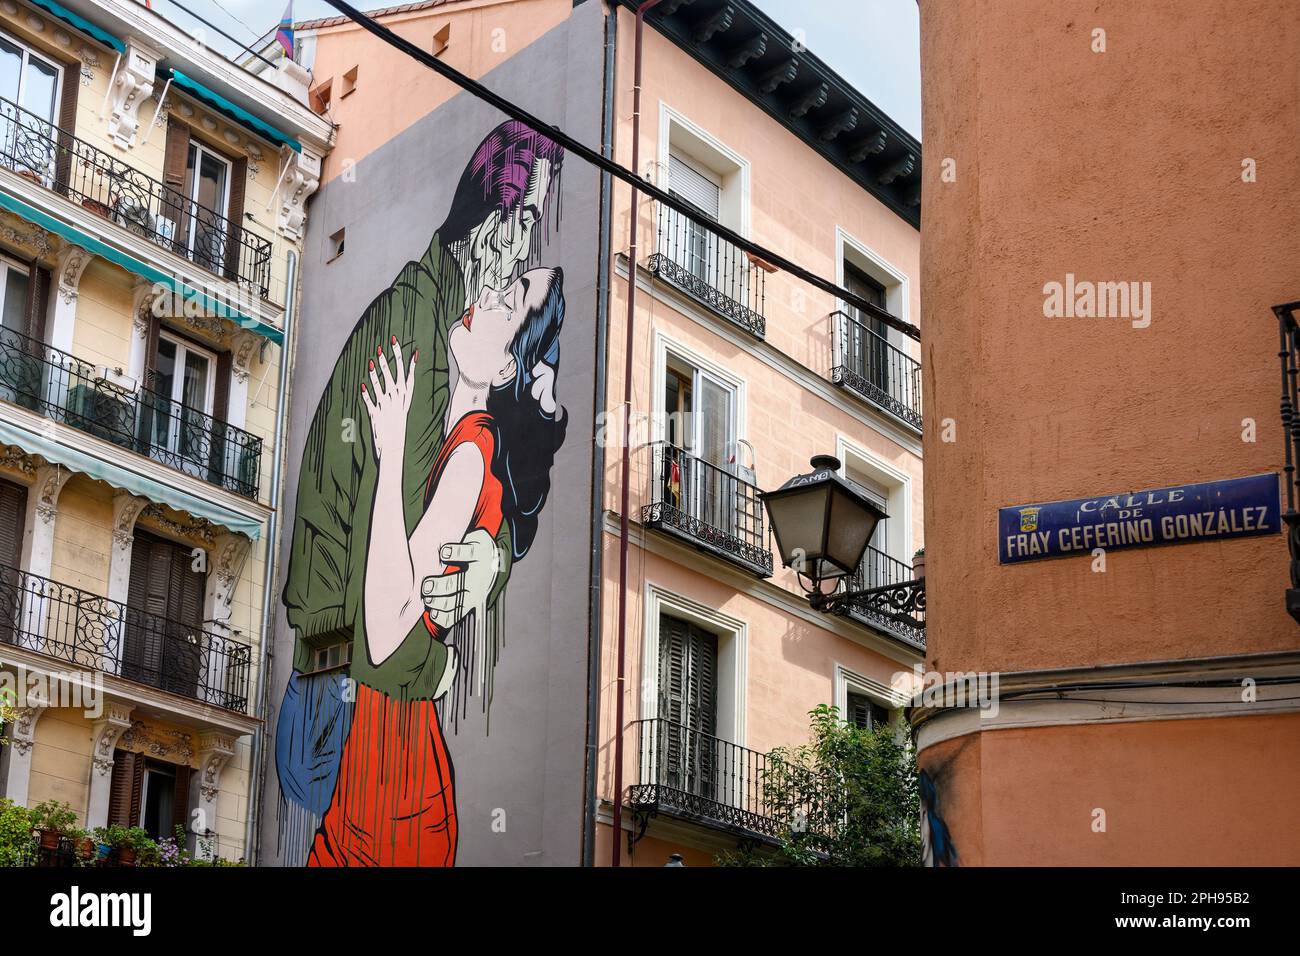 Mural called Run Away by artist D*Face on a building in the Calle de Embajadores, in the multi-cultural district of  Embajadores,Central Madrid, Spain Stock Photo